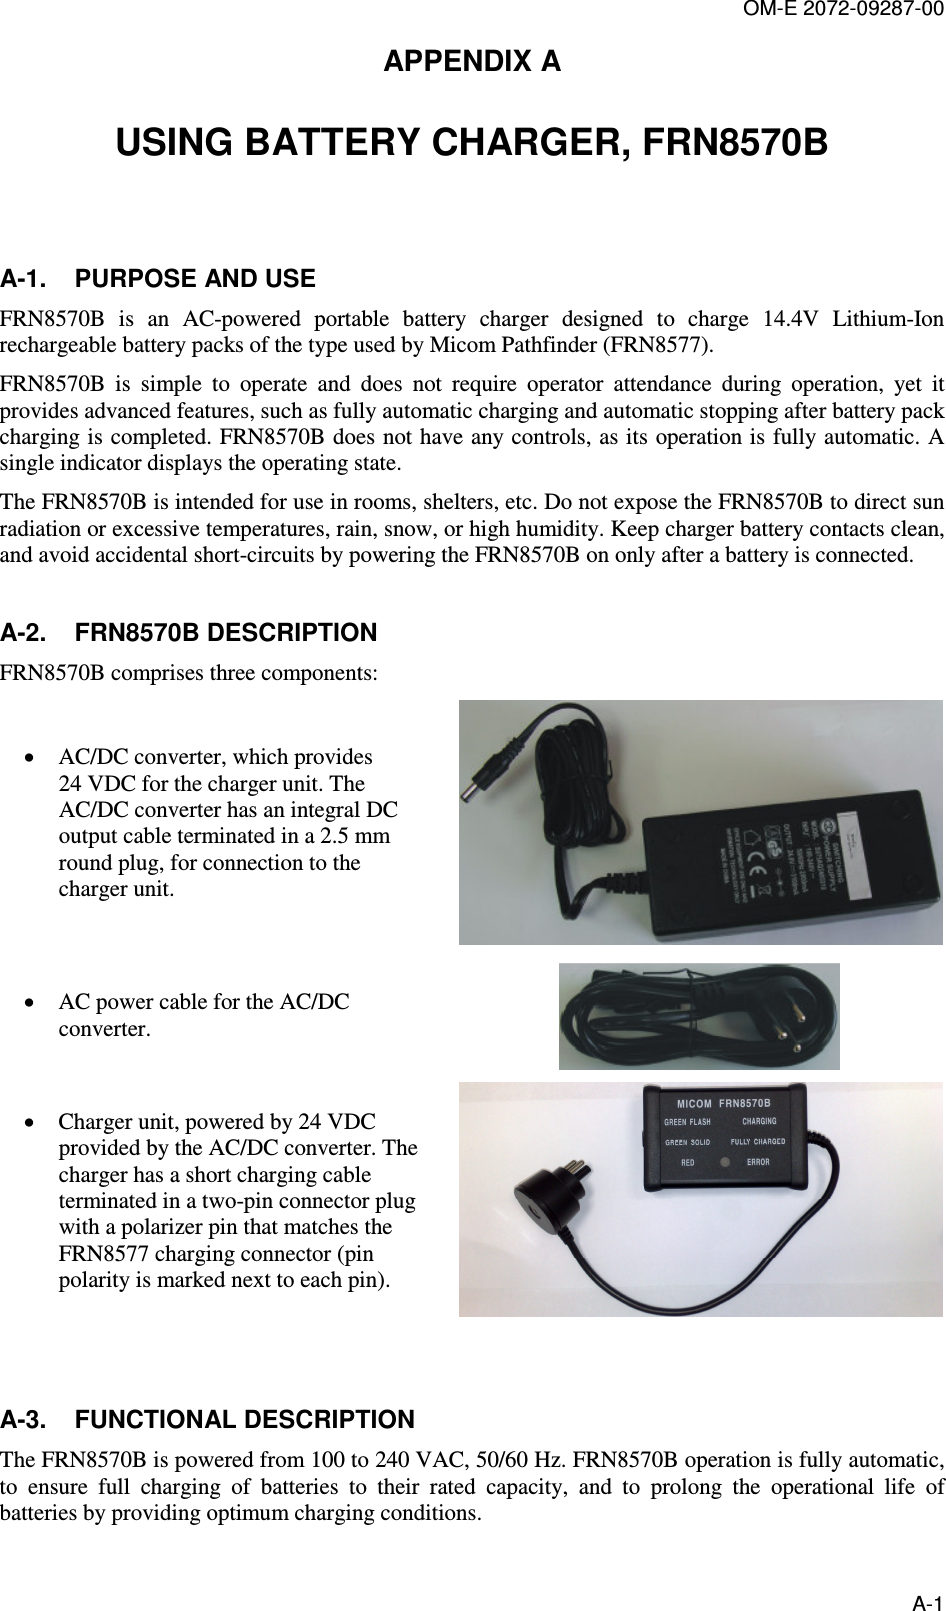 OM-E 2072-09287-00 A-1 APPENDIX A  USING BATTERY CHARGER, FRN8570B  A-1.  PURPOSE AND USE FRN8570B  is  an  AC-powered  portable  battery  charger  designed  to  charge  14.4V  Lithium-Ion rechargeable battery packs of the type used by Micom Pathfinder (FRN8577).  FRN8570B  is  simple  to  operate  and  does  not  require  operator  attendance  during  operation,  yet  it provides advanced features, such as fully automatic charging and automatic stopping after battery pack charging is completed. FRN8570B does not have any controls, as its operation is fully automatic. A single indicator displays the operating state. The FRN8570B is intended for use in rooms, shelters, etc. Do not expose the FRN8570B to direct sun radiation or excessive temperatures, rain, snow, or high humidity. Keep charger battery contacts clean, and avoid accidental short-circuits by powering the FRN8570B on only after a battery is connected. A-2.  FRN8570B DESCRIPTION FRN8570B comprises three components: • AC/DC converter, which provides 24 VDC for the charger unit. The AC/DC converter has an integral DC output cable terminated in a 2.5 mm round plug, for connection to the charger unit.  • AC power cable for the AC/DC converter.  • Charger unit, powered by 24 VDC provided by the AC/DC converter. The charger has a short charging cable terminated in a two-pin connector plug with a polarizer pin that matches the FRN8577 charging connector (pin polarity is marked next to each pin).   A-3.  FUNCTIONAL DESCRIPTION The FRN8570B is powered from 100 to 240 VAC, 50/60 Hz. FRN8570B operation is fully automatic, to  ensure  full  charging  of  batteries  to  their  rated  capacity,  and  to  prolong  the  operational  life  of batteries by providing optimum charging conditions. 